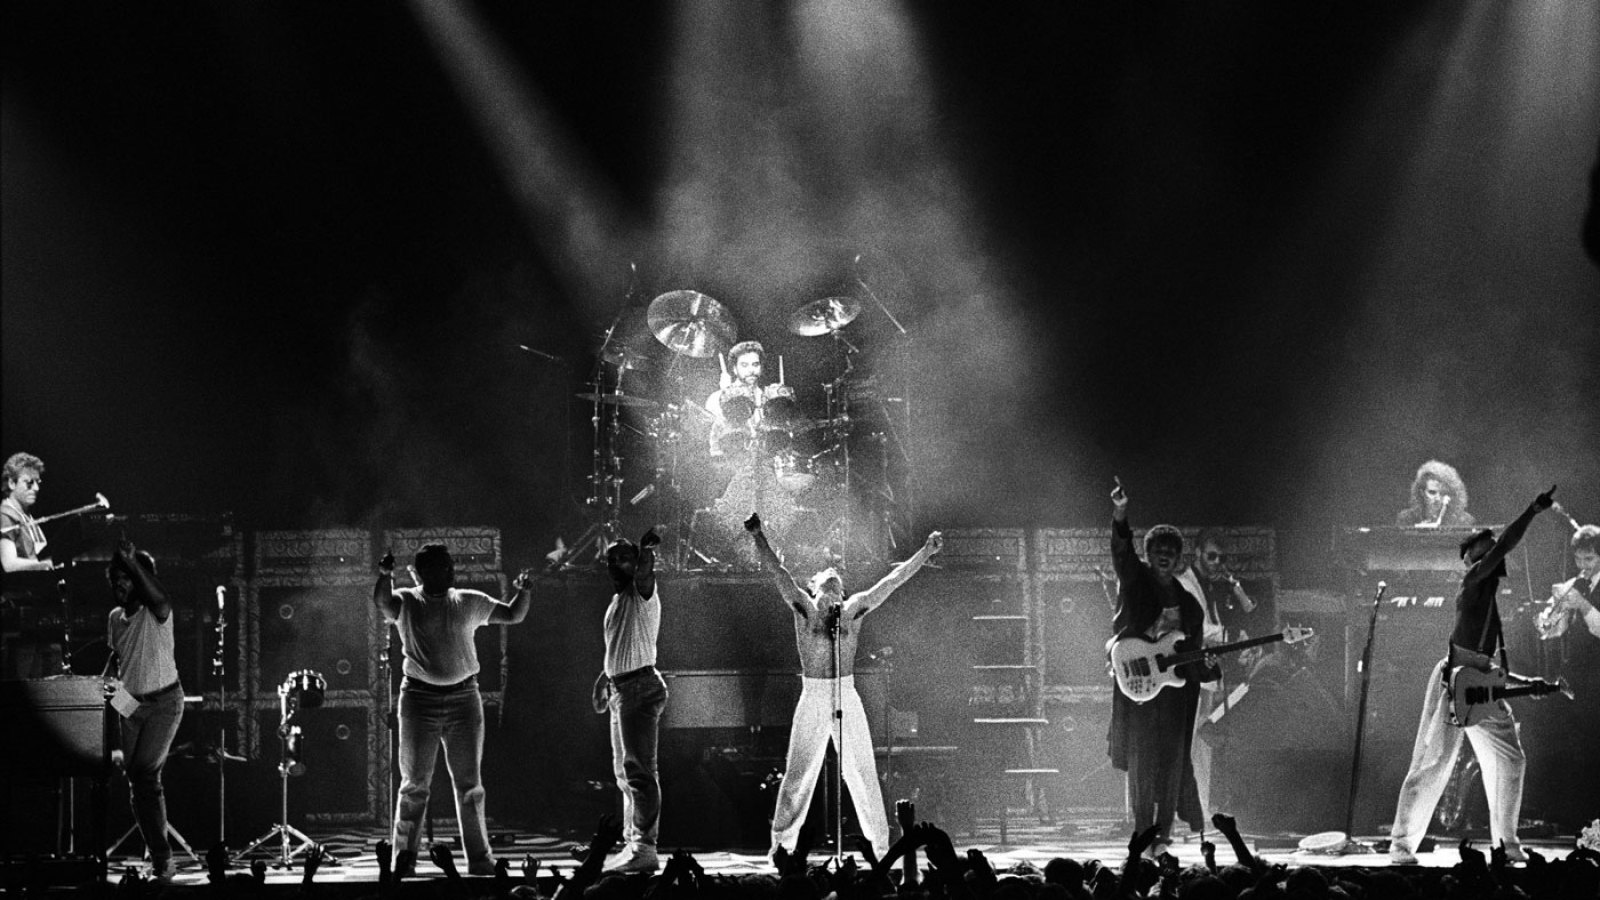 Prince performs with The Revolution in Rotterdam in 1986.